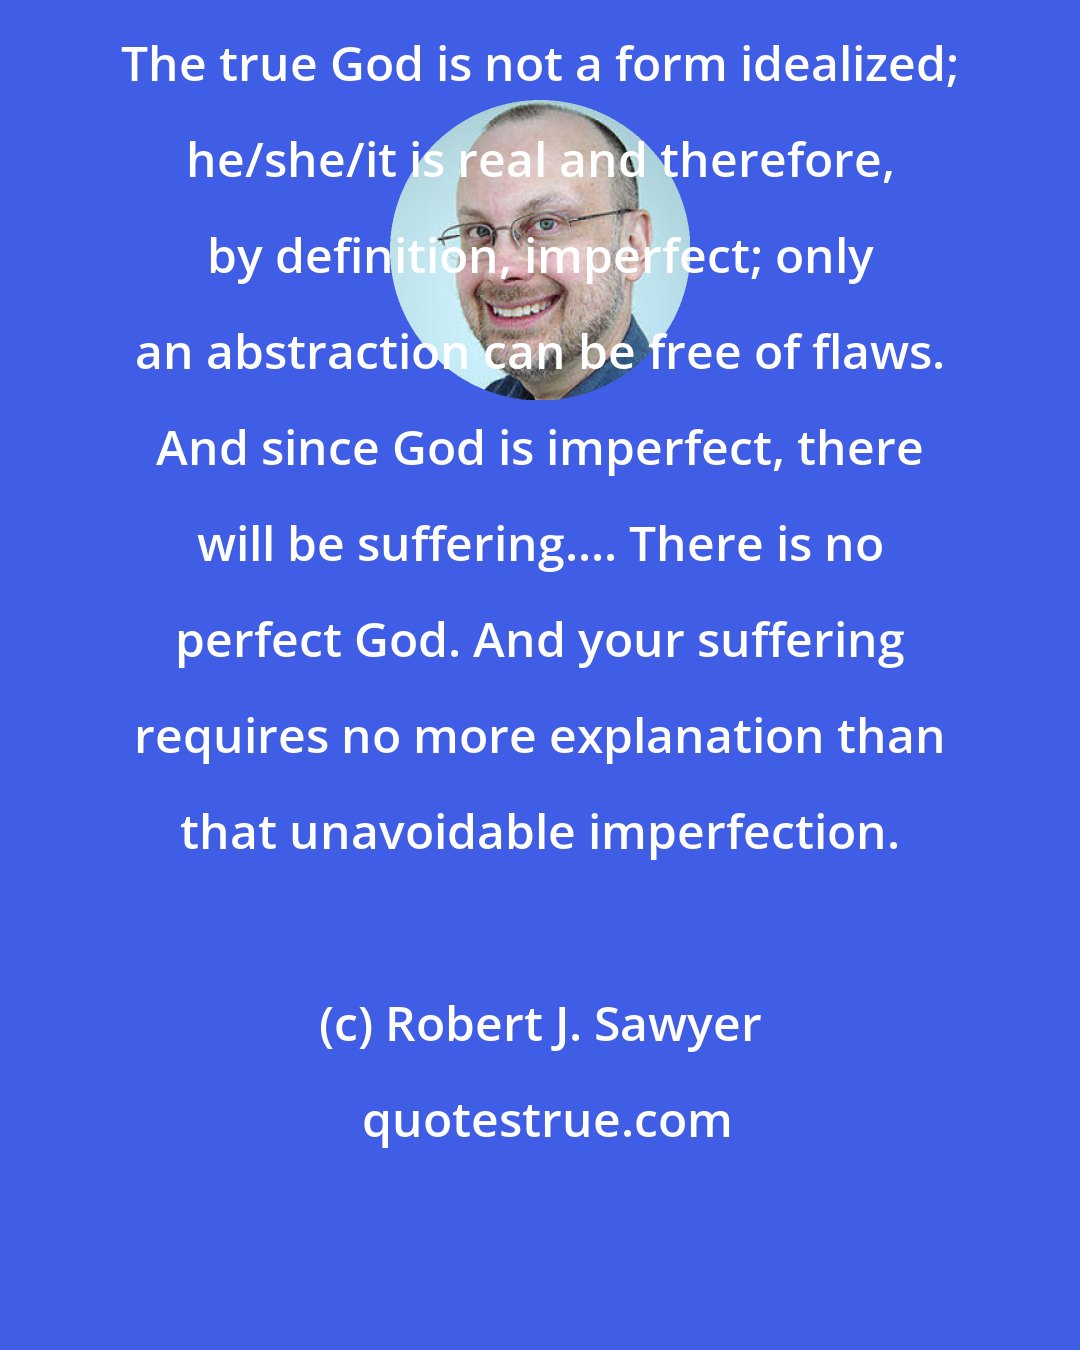 Robert J. Sawyer: The true God is not a form idealized; he/she/it is real and therefore, by definition, imperfect; only an abstraction can be free of flaws. And since God is imperfect, there will be suffering.... There is no perfect God. And your suffering requires no more explanation than that unavoidable imperfection.